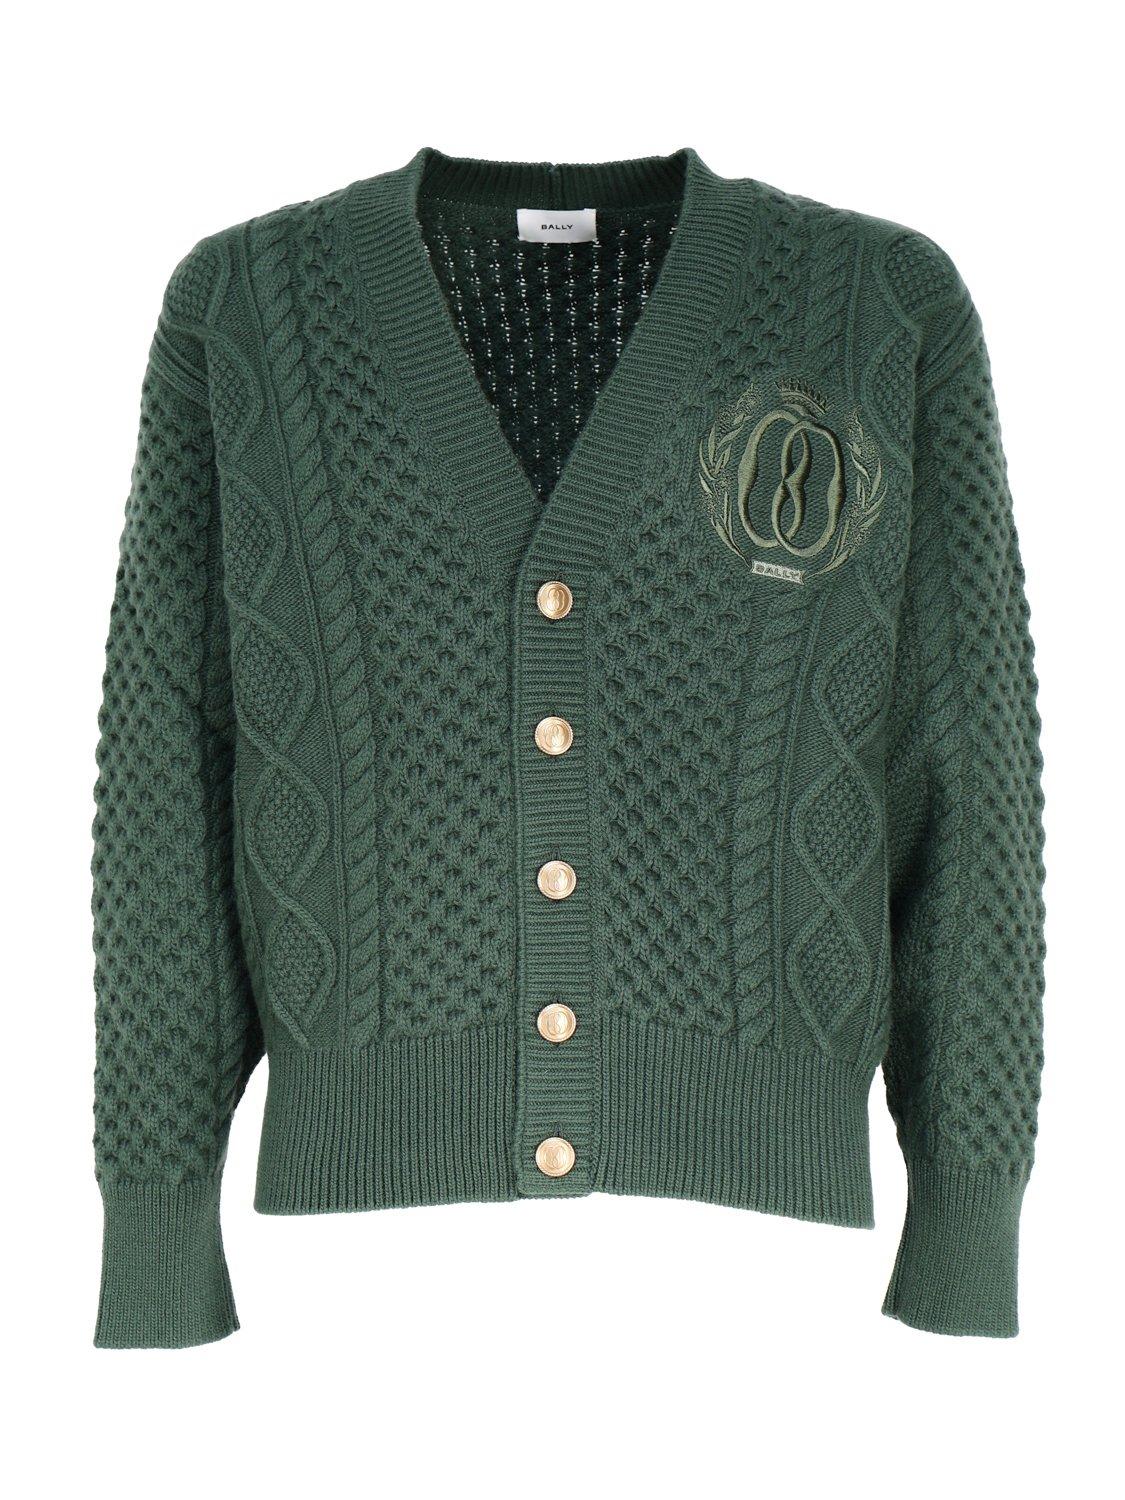 BALLY LOGO MOTIF EMBROIDERED BUTTONED CARDIGAN